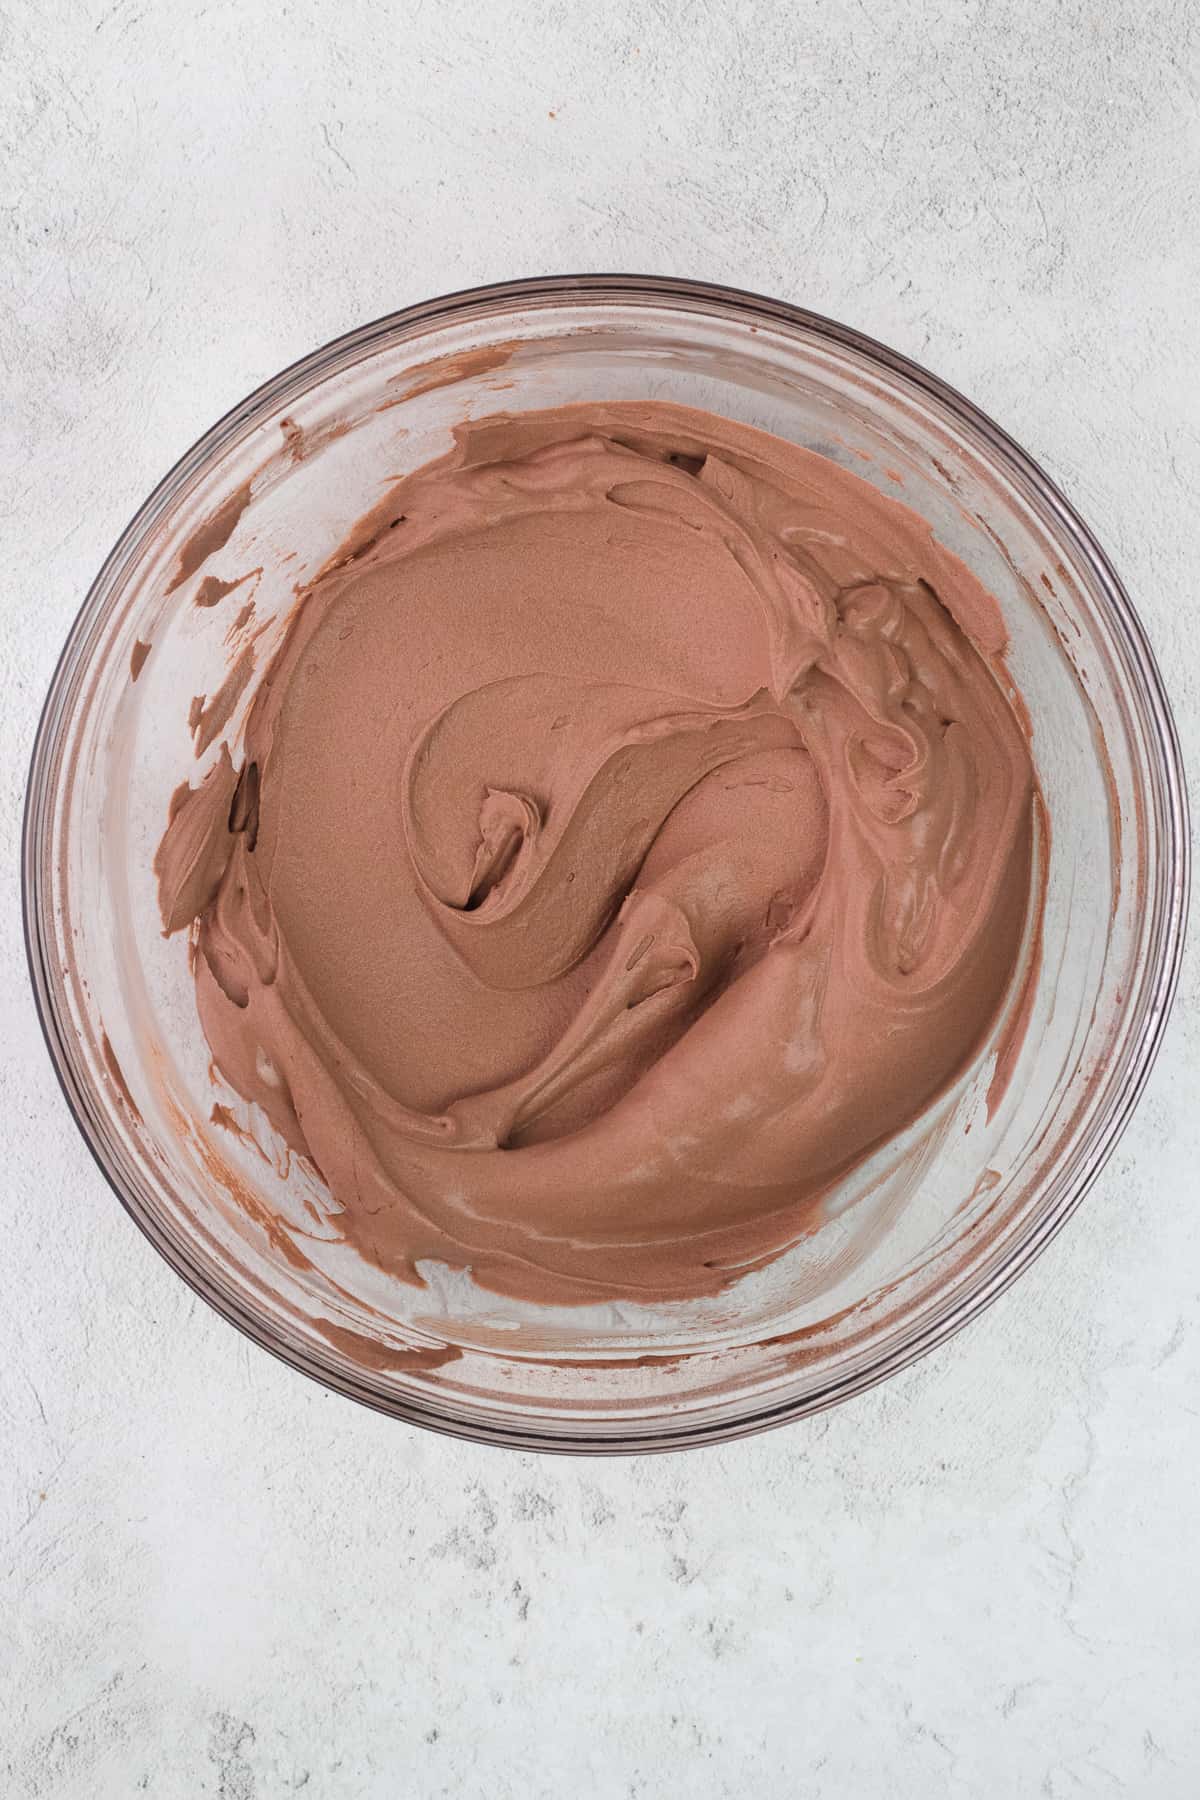 Chocolate whipped cream in a bowl